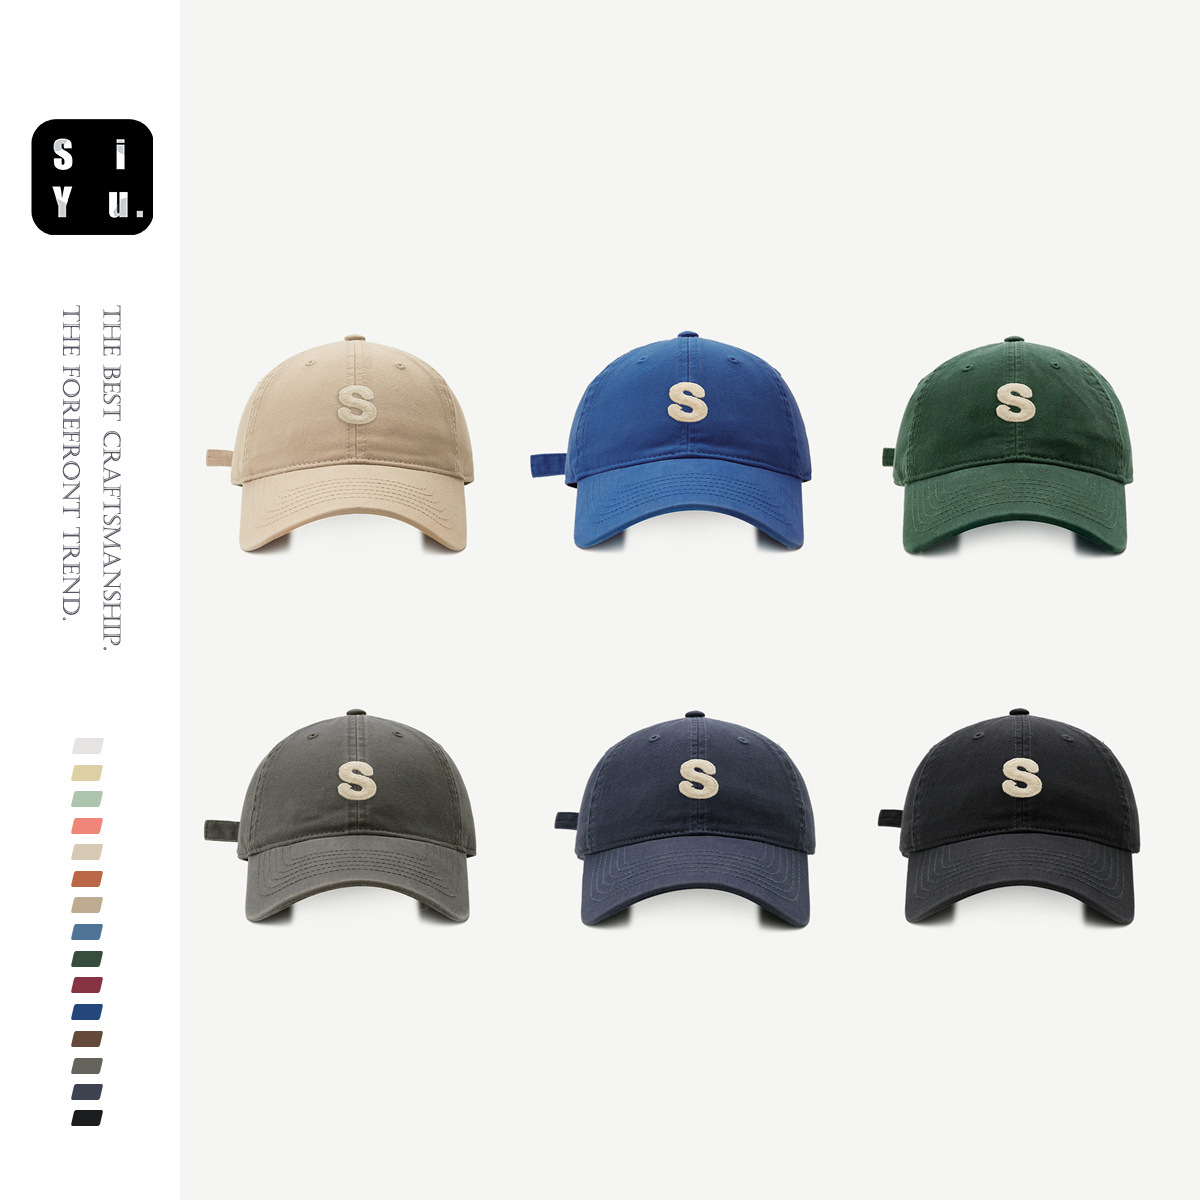 High Quality S Letter Soft Top Cotton Baseball Cap Male Korean Ins Face-Showing Little Wild Four Seasons Japanese Style Peaked Cap Female